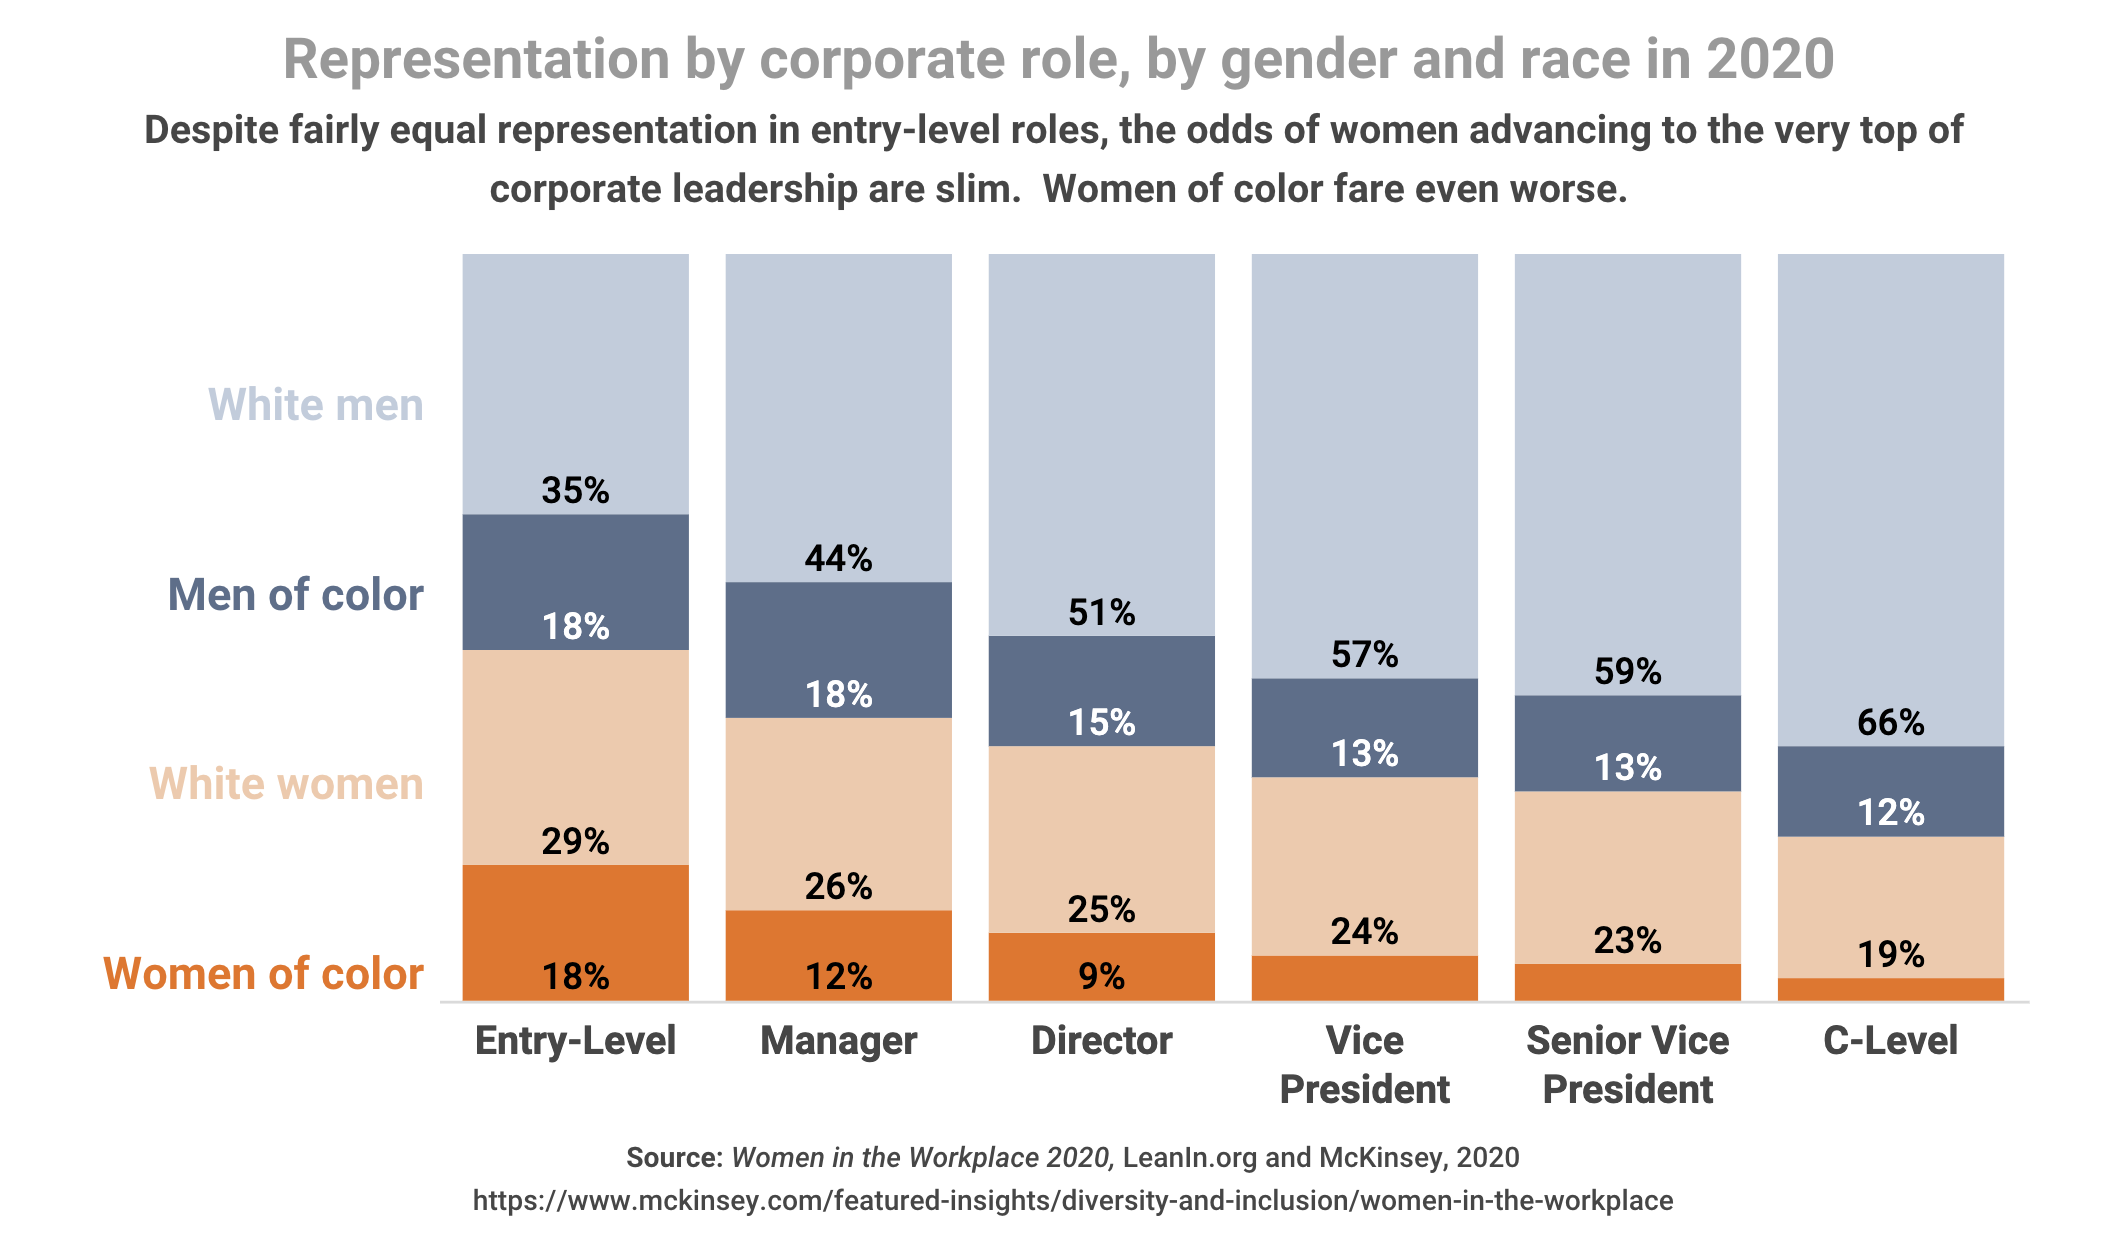 Bar graph of corporate roles by gender and race 2020